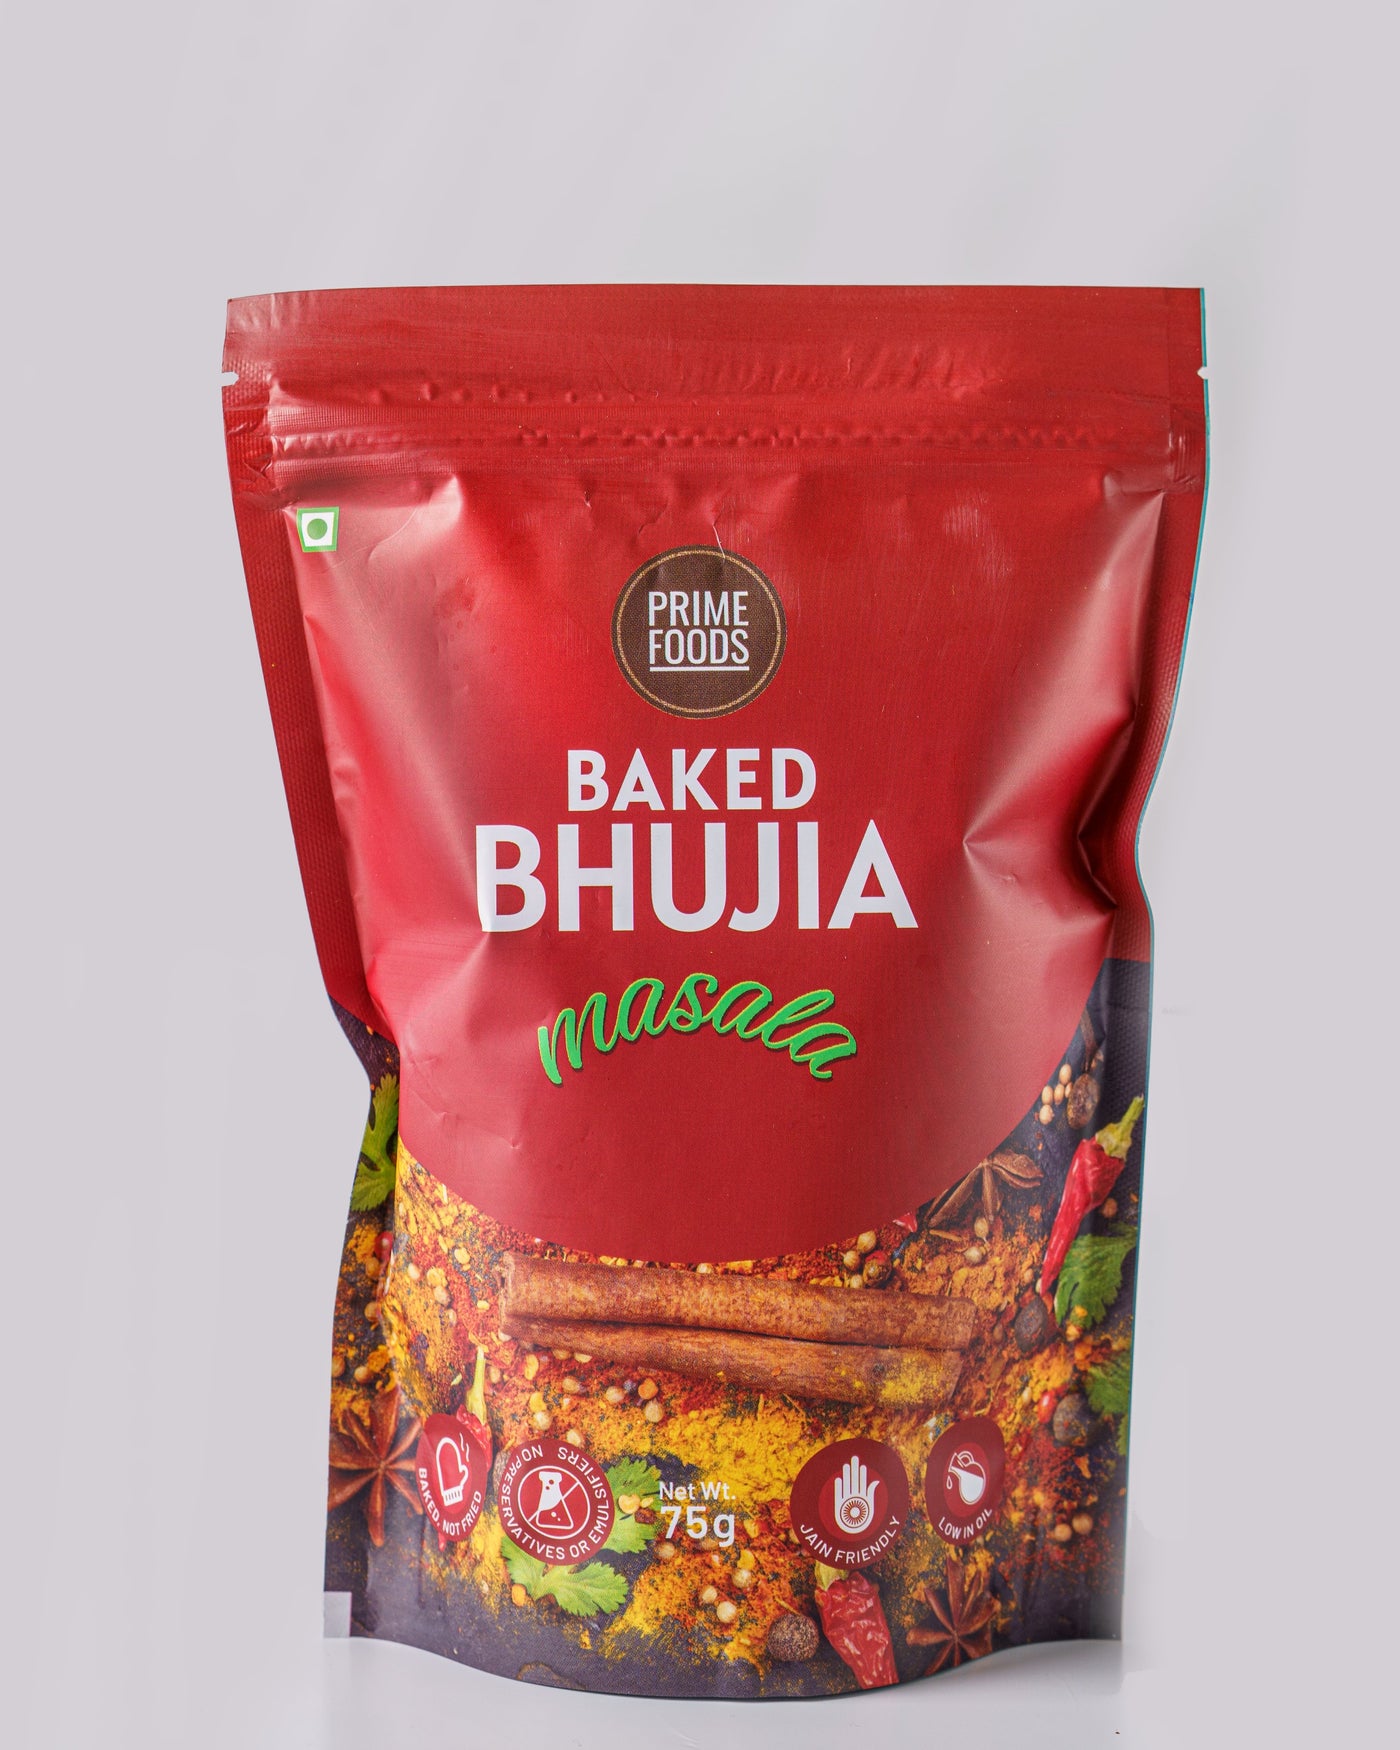 Baked Bhujia:Masala (pack of 3) (3x75g)